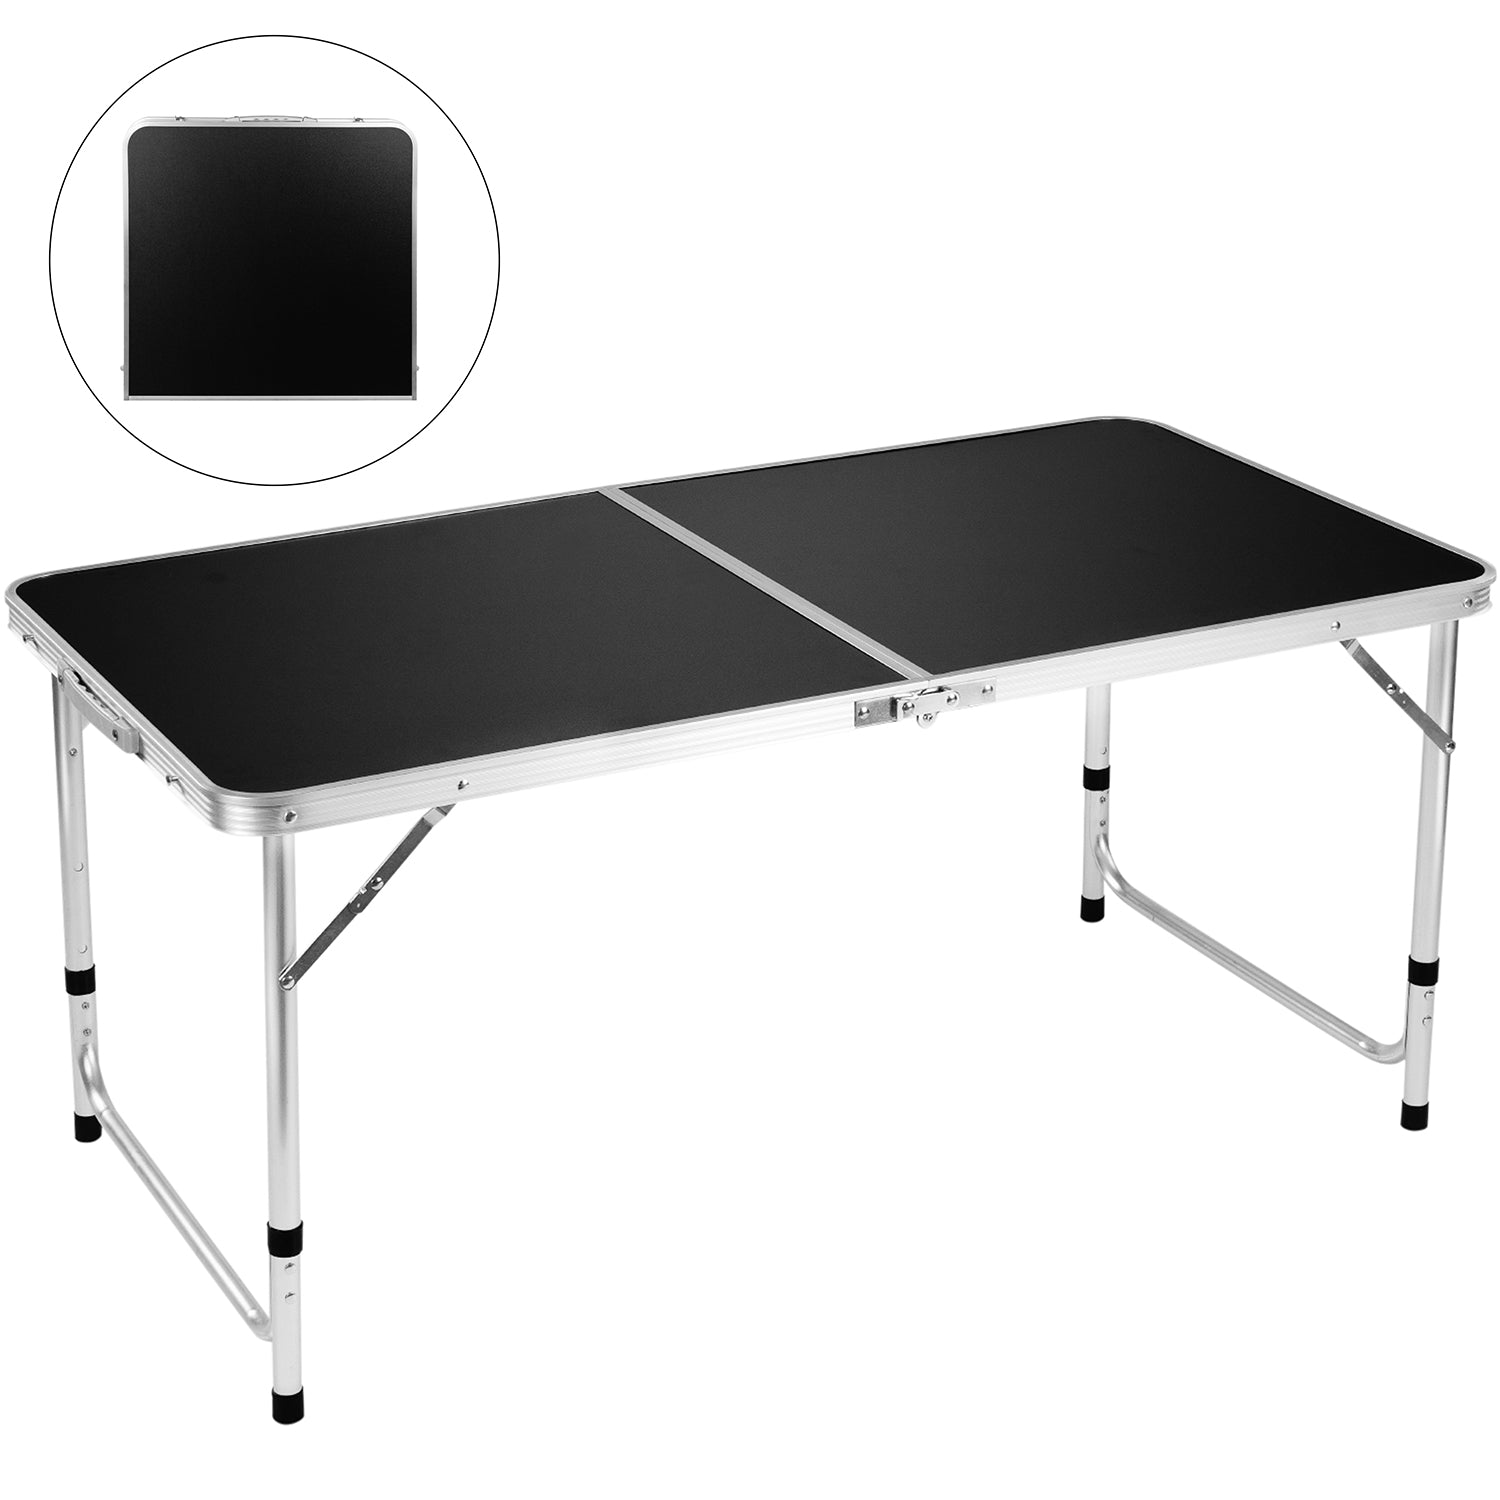 Folding Camping Table, FiveJoy 4 FT Aluminum Height Adjustable 47" x 24"